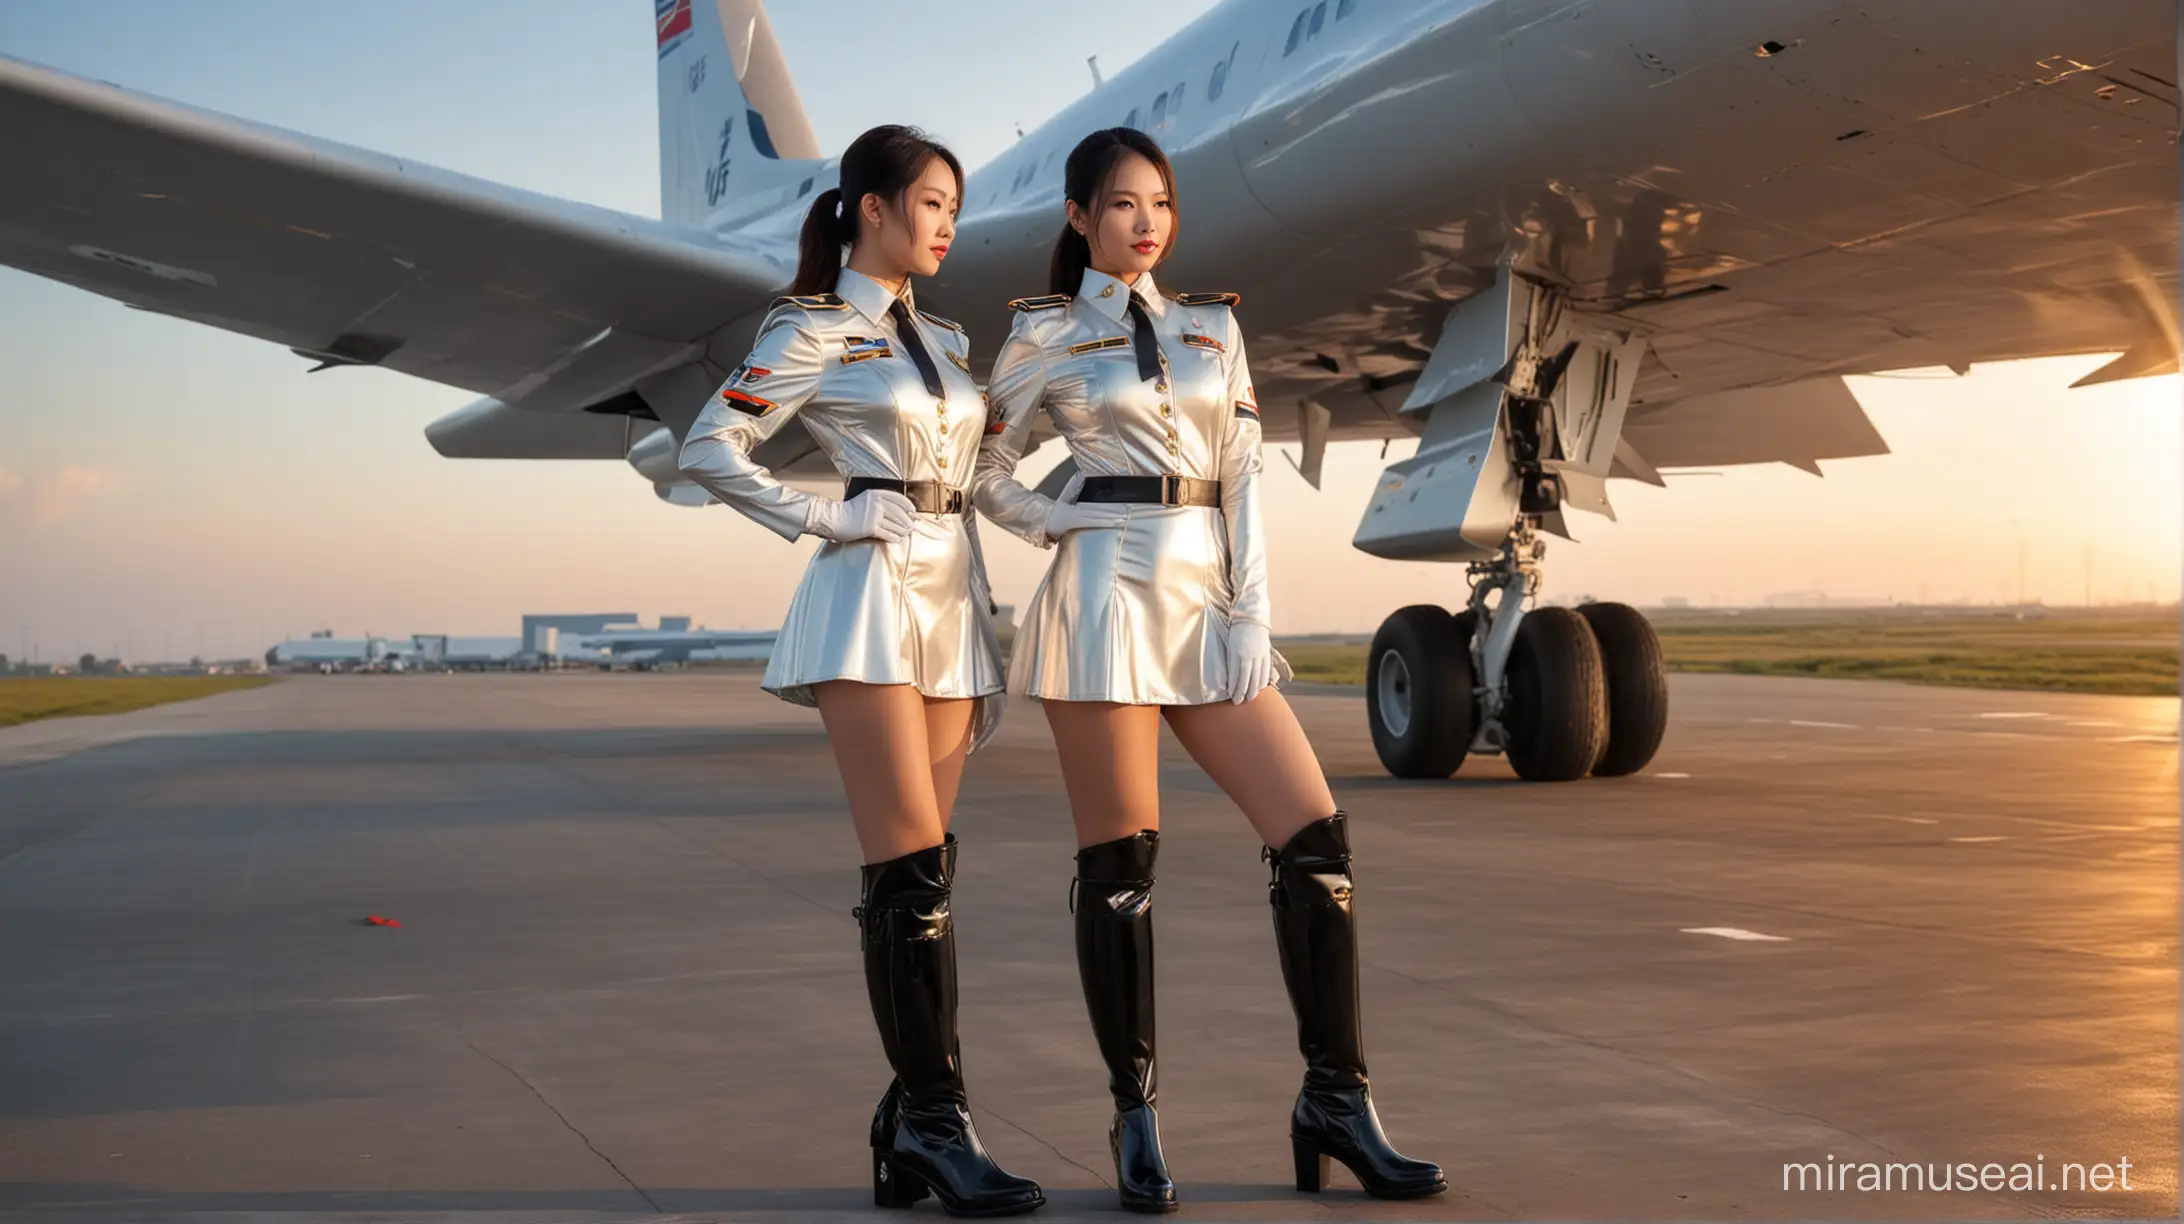 chinese woman, latex uniform, military officer, very shiny glossy patent uniform, short-sleeve latex uniform, short skirt, rubber gloves, patent overknee platform boots, sunset lighting, standing beneath an airplane wing ready to take flight